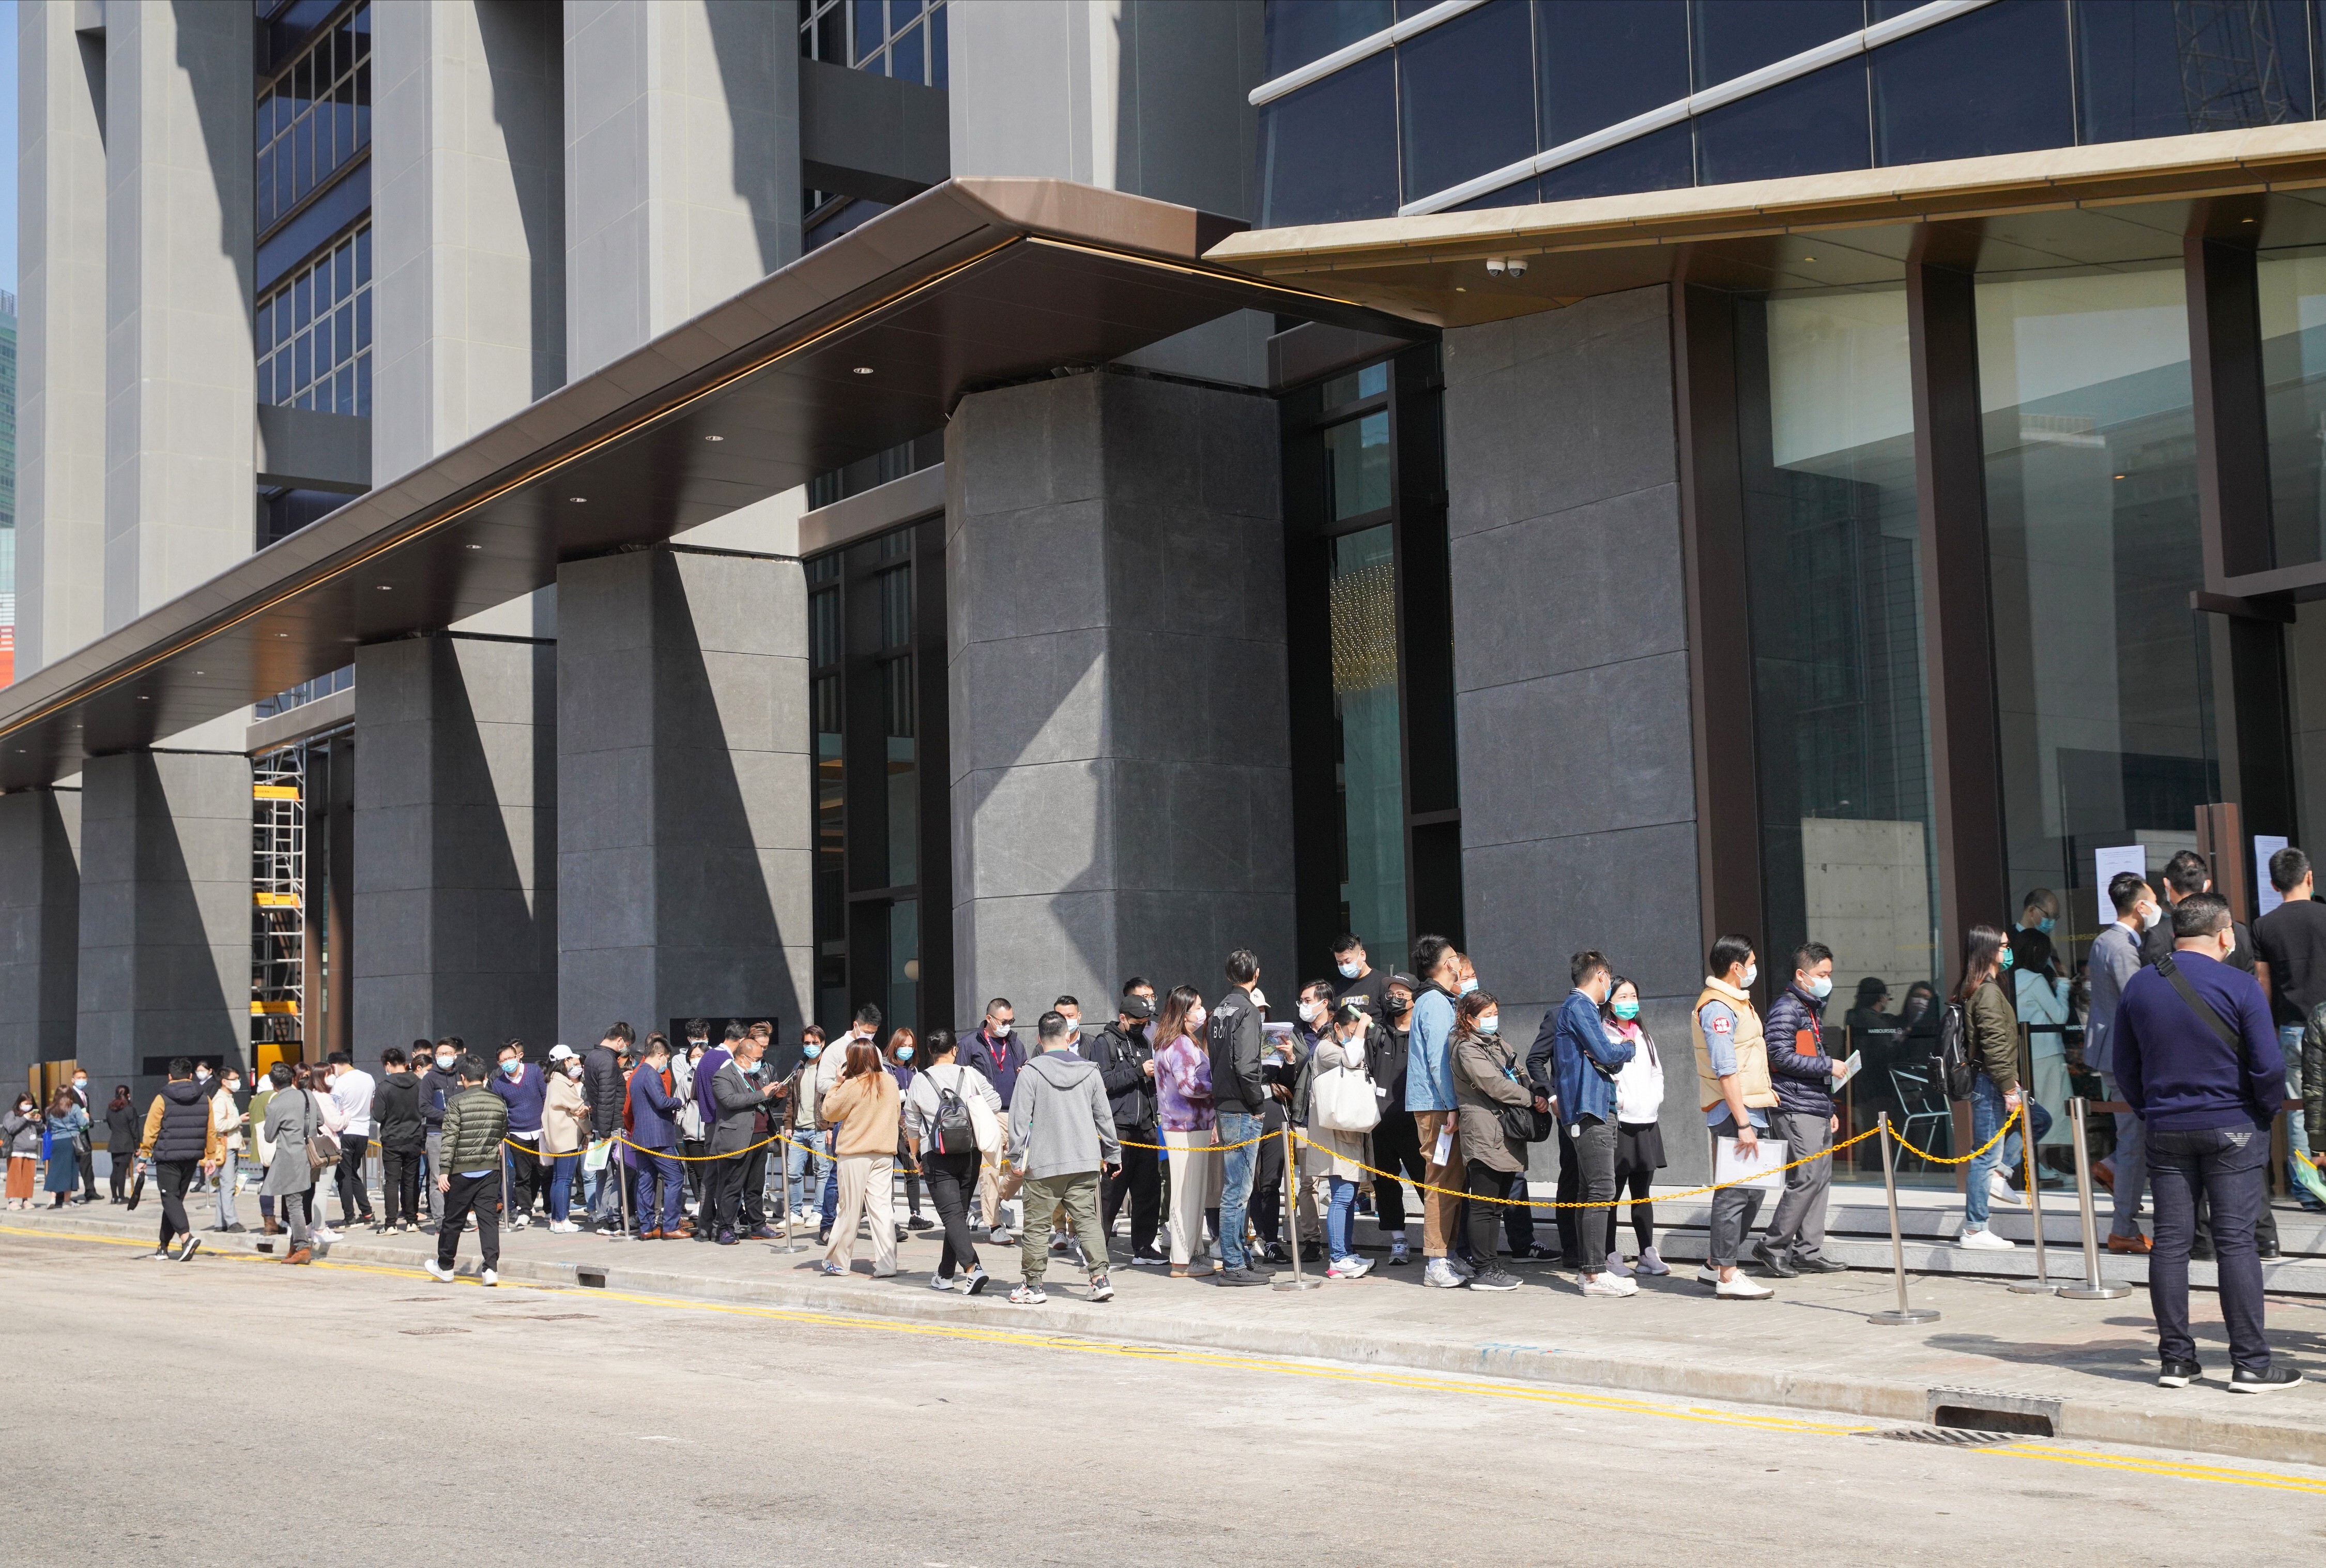 Buyers lining up for Nan Fung's LP10 (Lohas Park 10) at the developer’s sales office at Harbourside in Kowloon Bay on January 30, 2021. Photo: Winson Wong